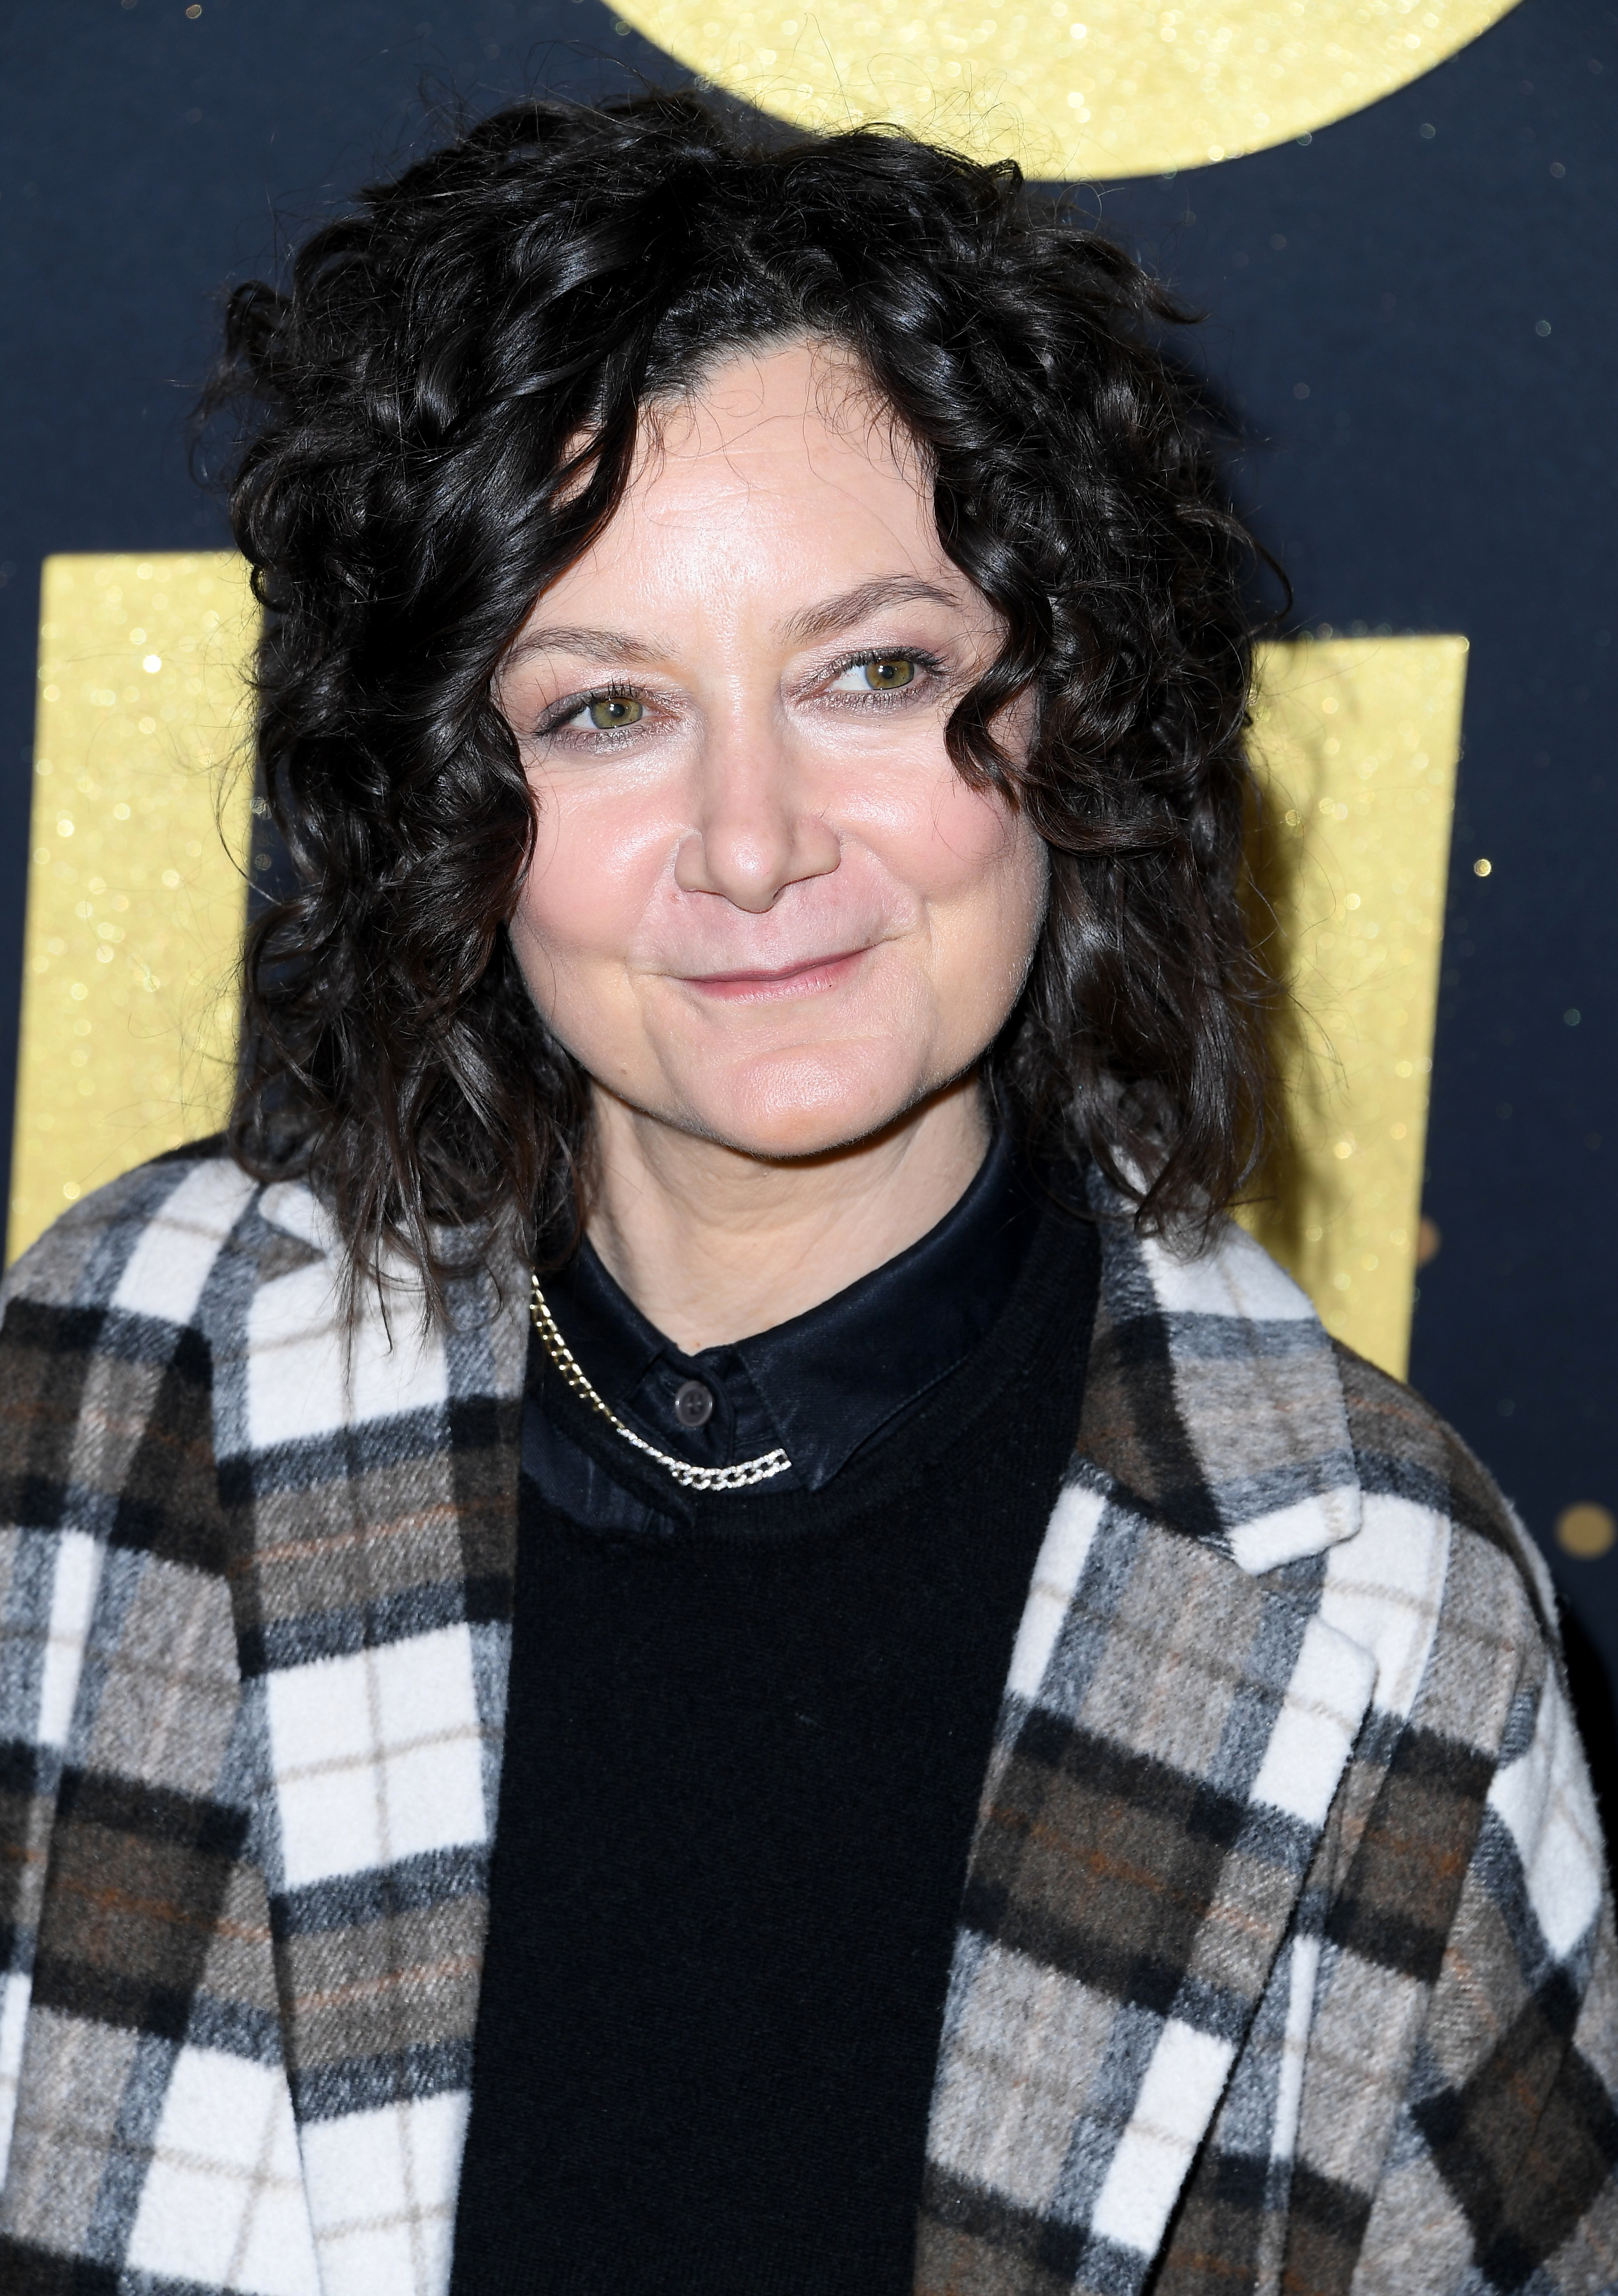 Sara Gilbert arrives at the Disney+ "Elton John Live: Farewell From Dodger Stadium" Yellow Brick Road Event at Dodger Stadium on November 20, 2022, in Los Angeles, California. | Source: Getty Images